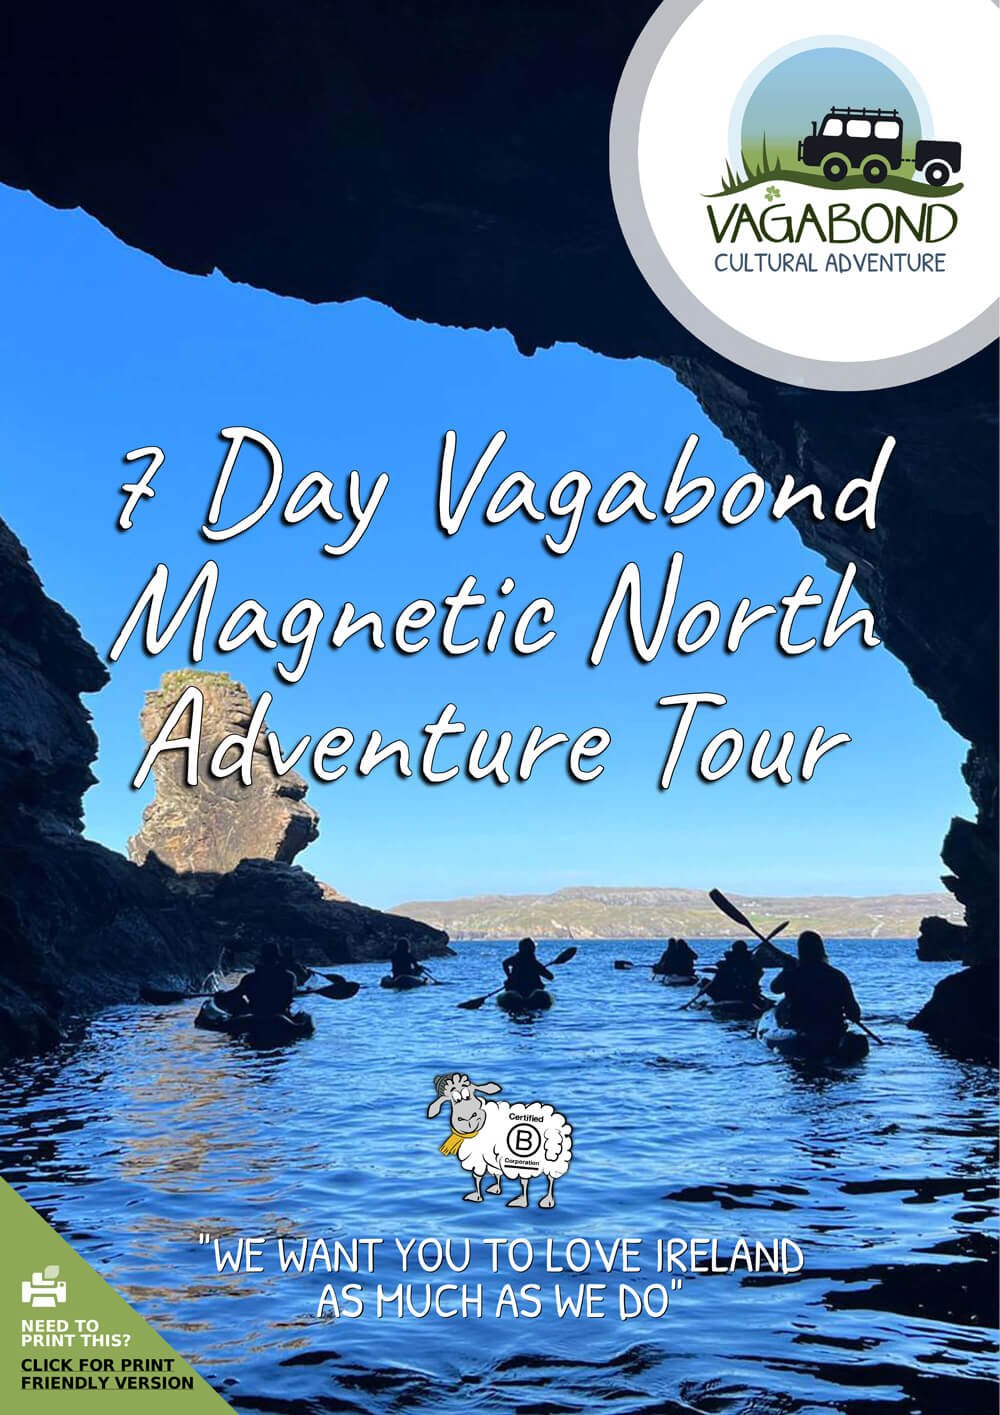 7 Day Vagabond Magnetic North Adventure Tour itinerary cover showing kayakers